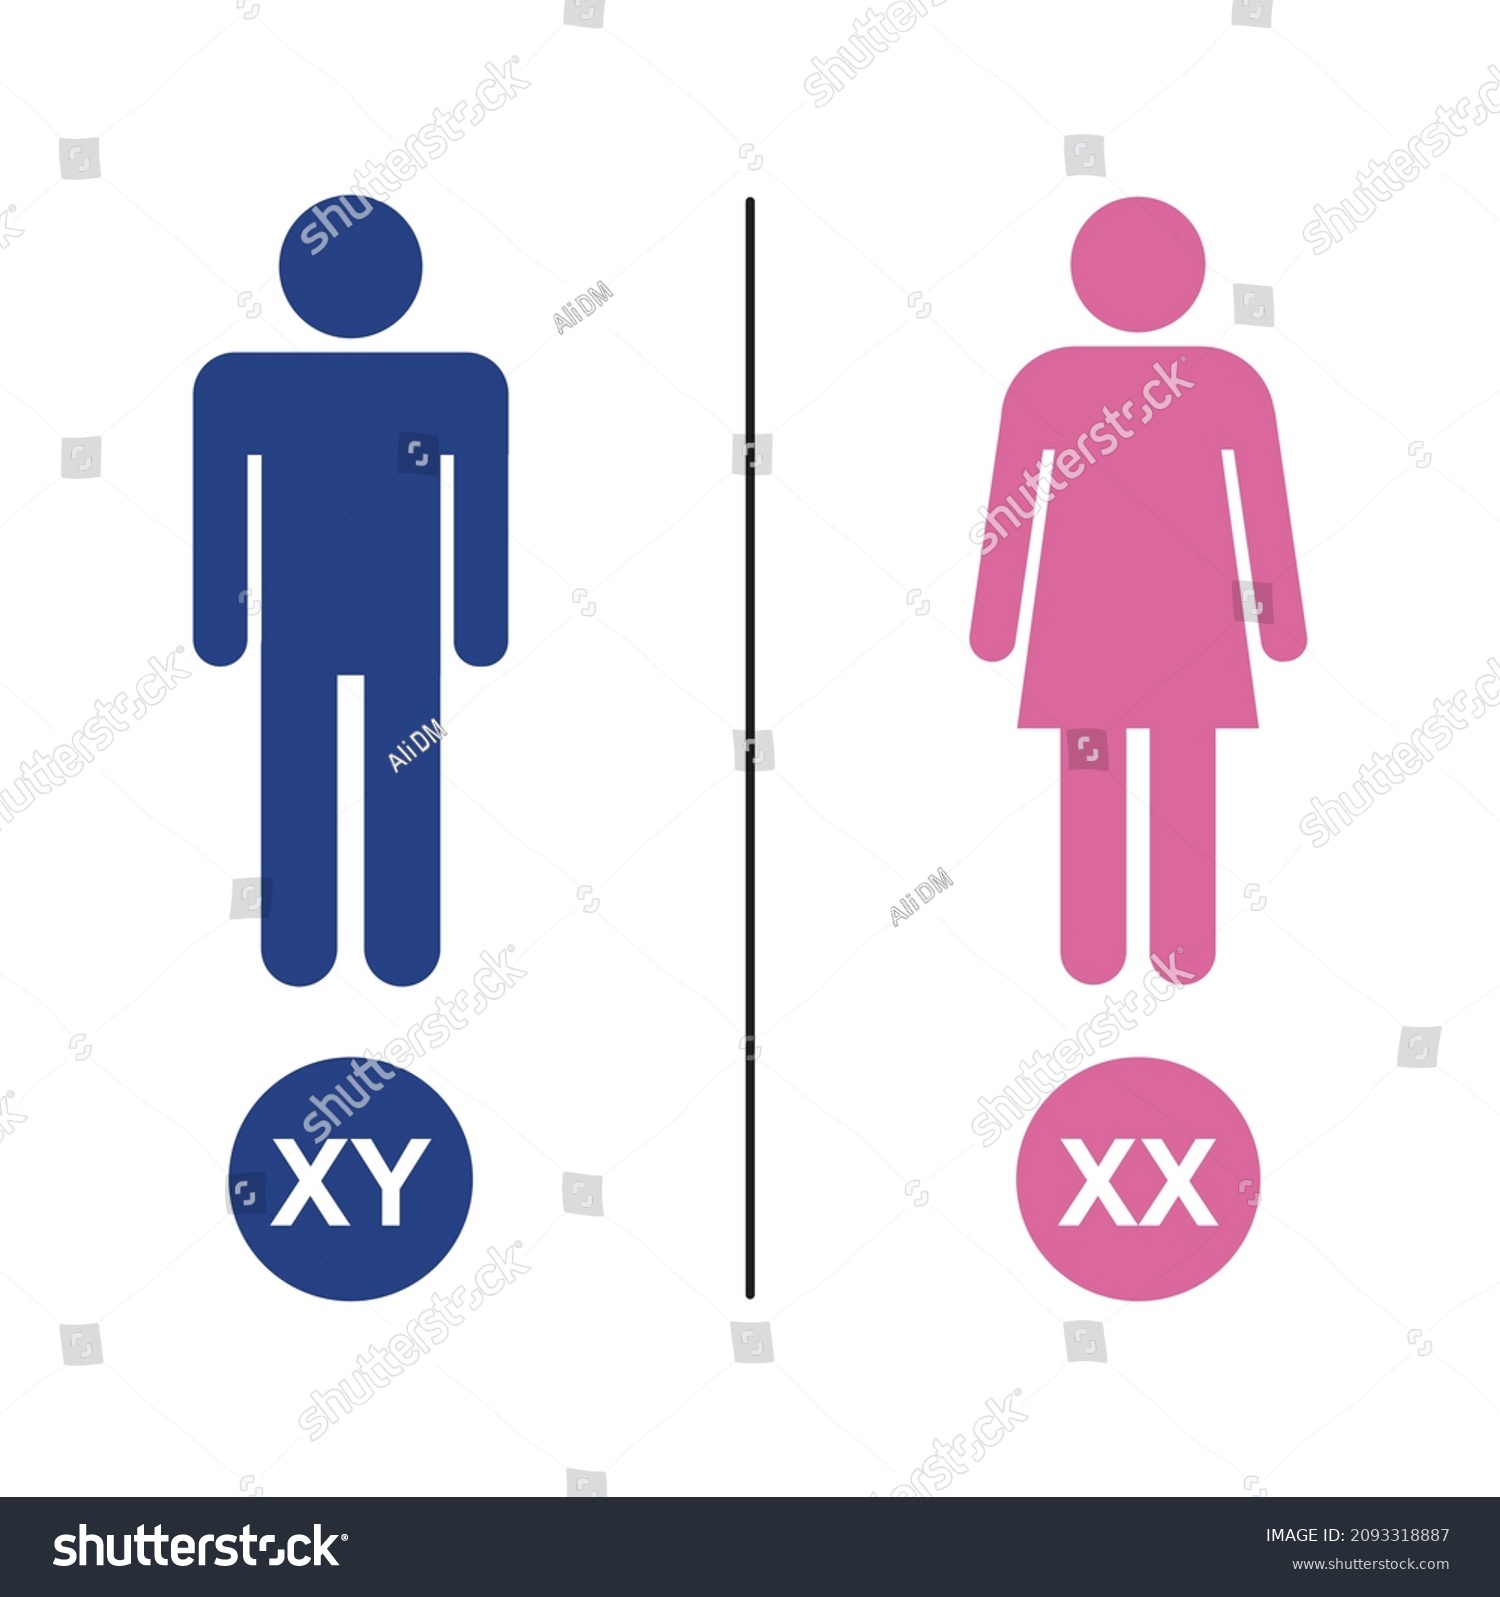 Colorful Illustration Human Sex Determination Xy Stock Vector Royalty Free 2093318887 3921